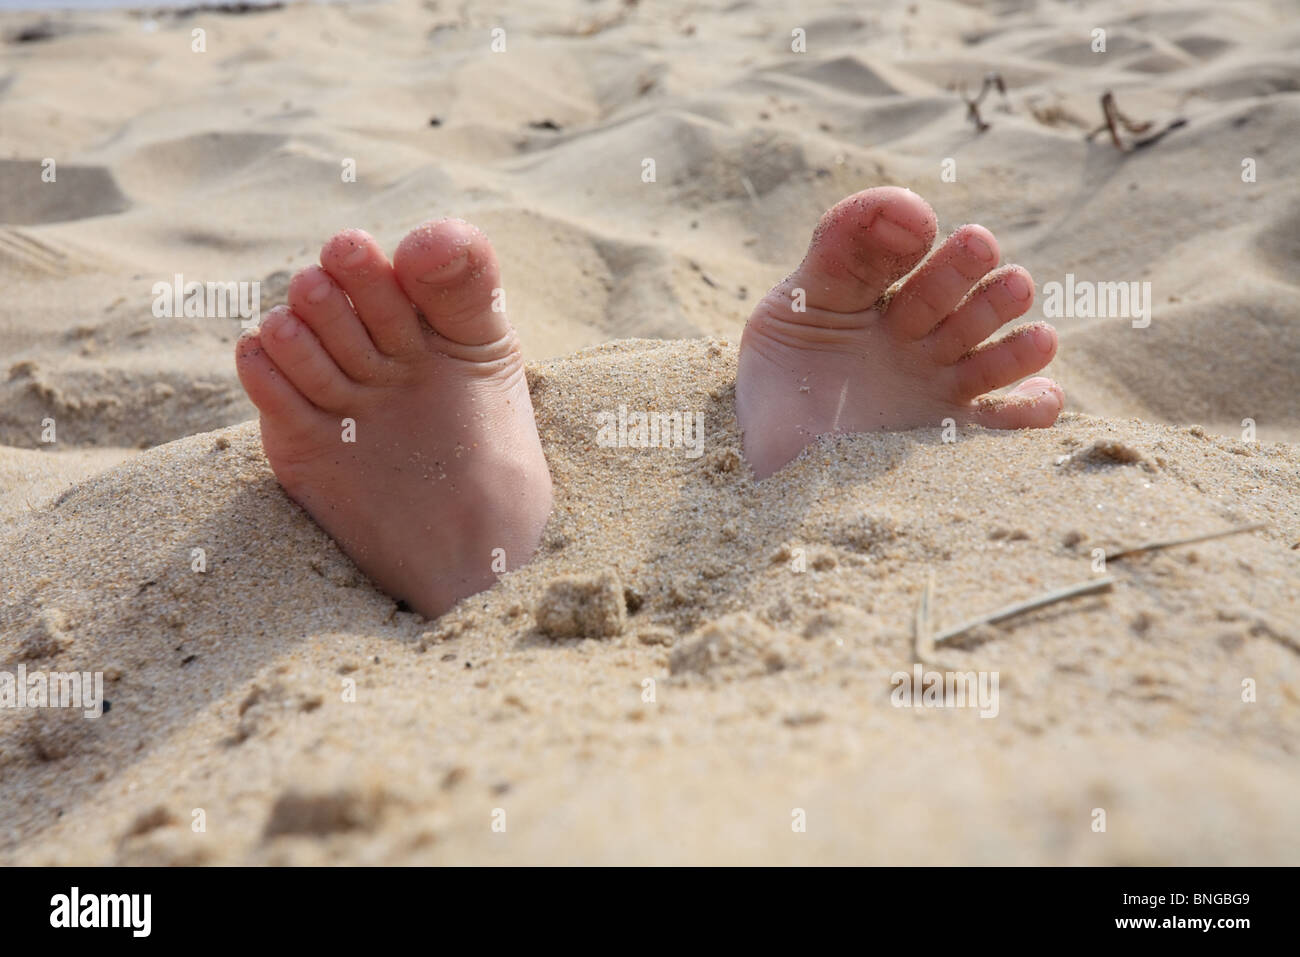 Children's feet are buried in sand Stock Photo